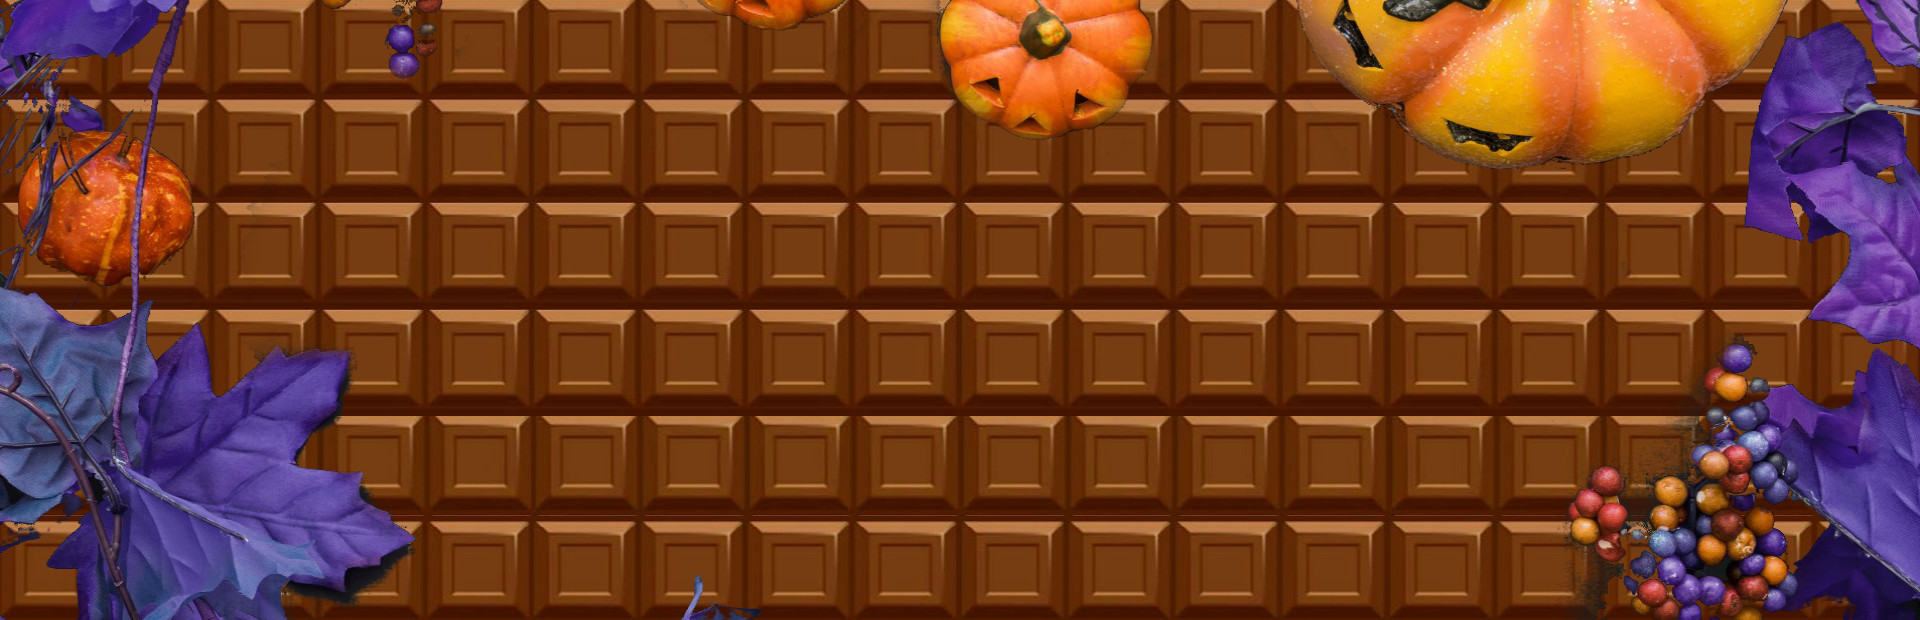 Chocolate makes you happy: Halloween cover image